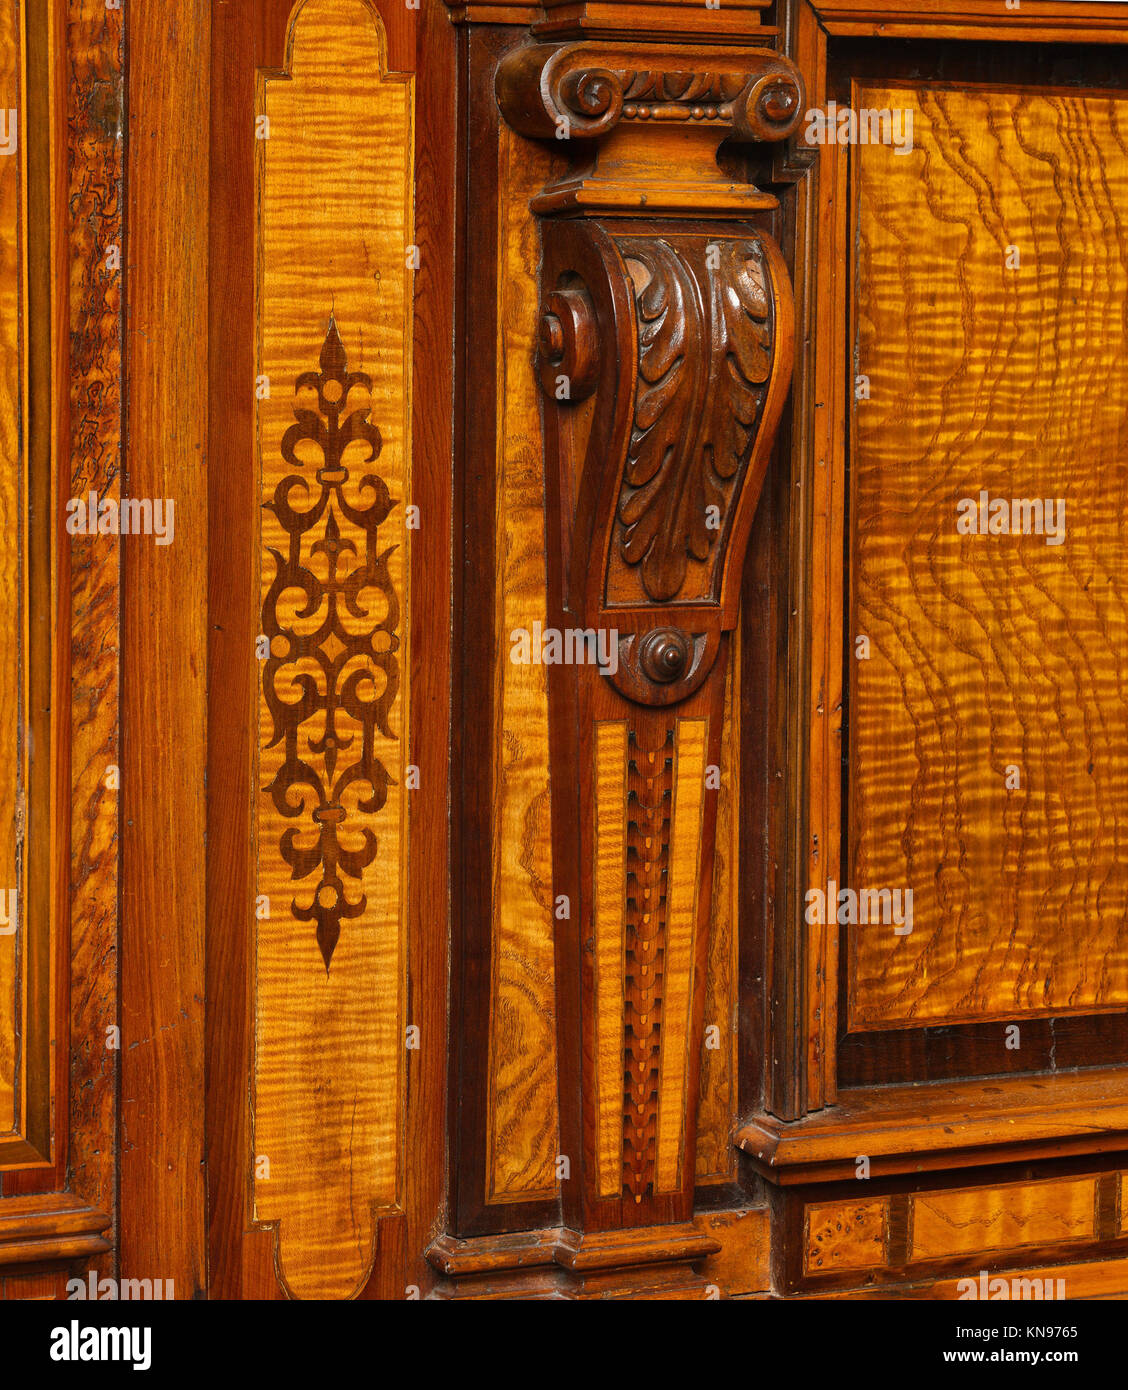 Cabinet (Fassadenschrank) MET DP106612 188937 German, Nuremberg, Cabinet (Fassadenschrank), early 17th century, Pine, oak, walnut; Hungarian ash, birch, various fruitwoods, walnut, palisander, other woods, partly stained (marquetry veneer); wrought iron,, Overall: H. 104 x W. 84 x D. 30 1/4 in. (264.2 x 213.4 x 76.8 cm);  Field measurement: H. 102 5/8 x W. 89 1/4 x D. 28 1/2 in. at mid-height (cornice wider). The Metropolitan Museum of Art, New York. Rogers Fund, 1905 (05.22.2) Stock Photo